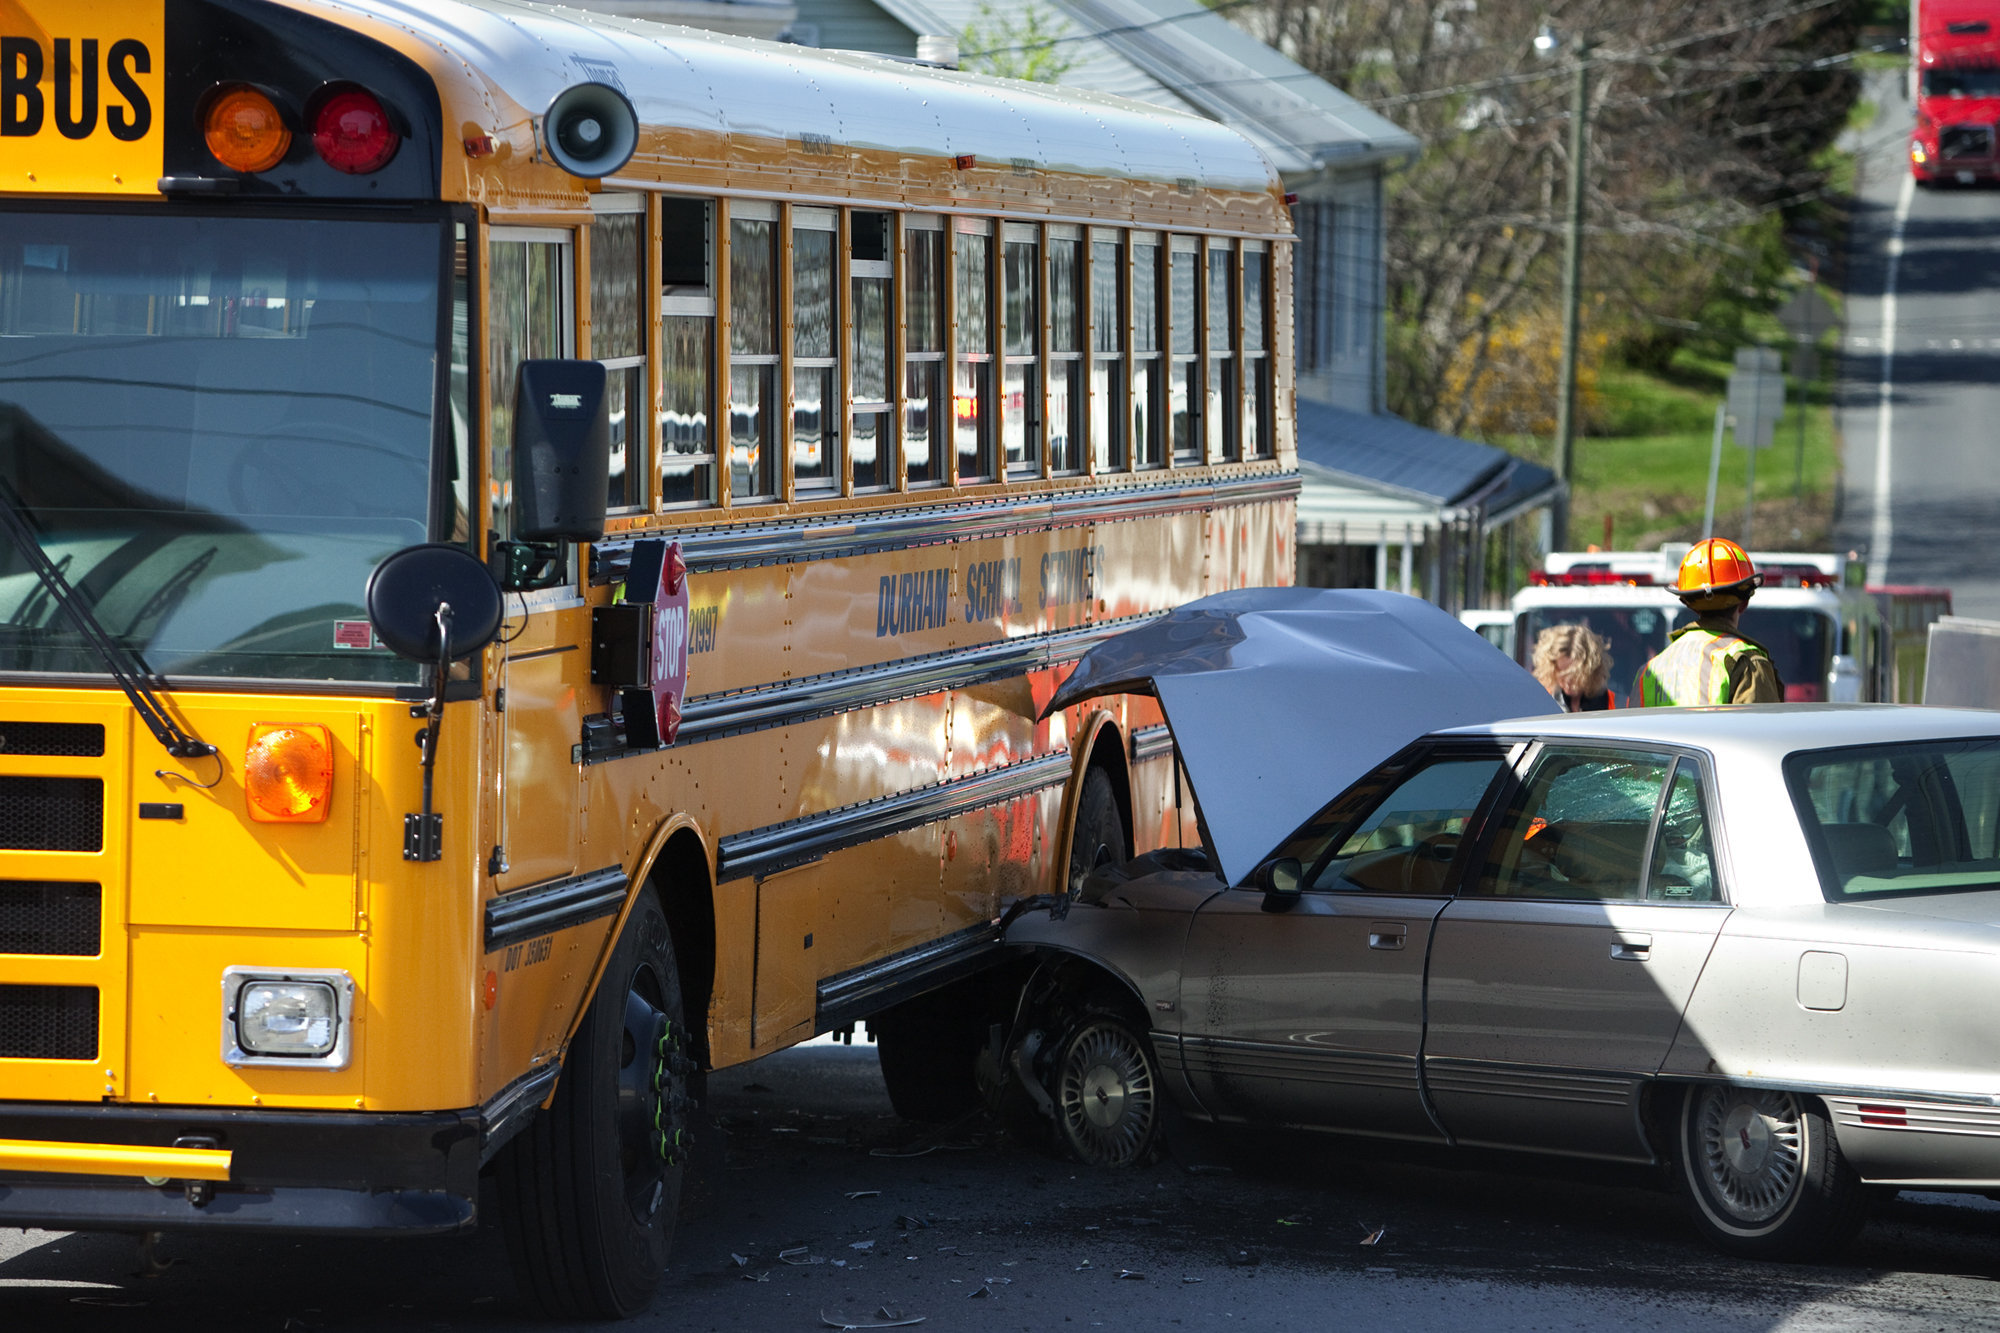 What You Need to Know About Bus and Truck Accidents